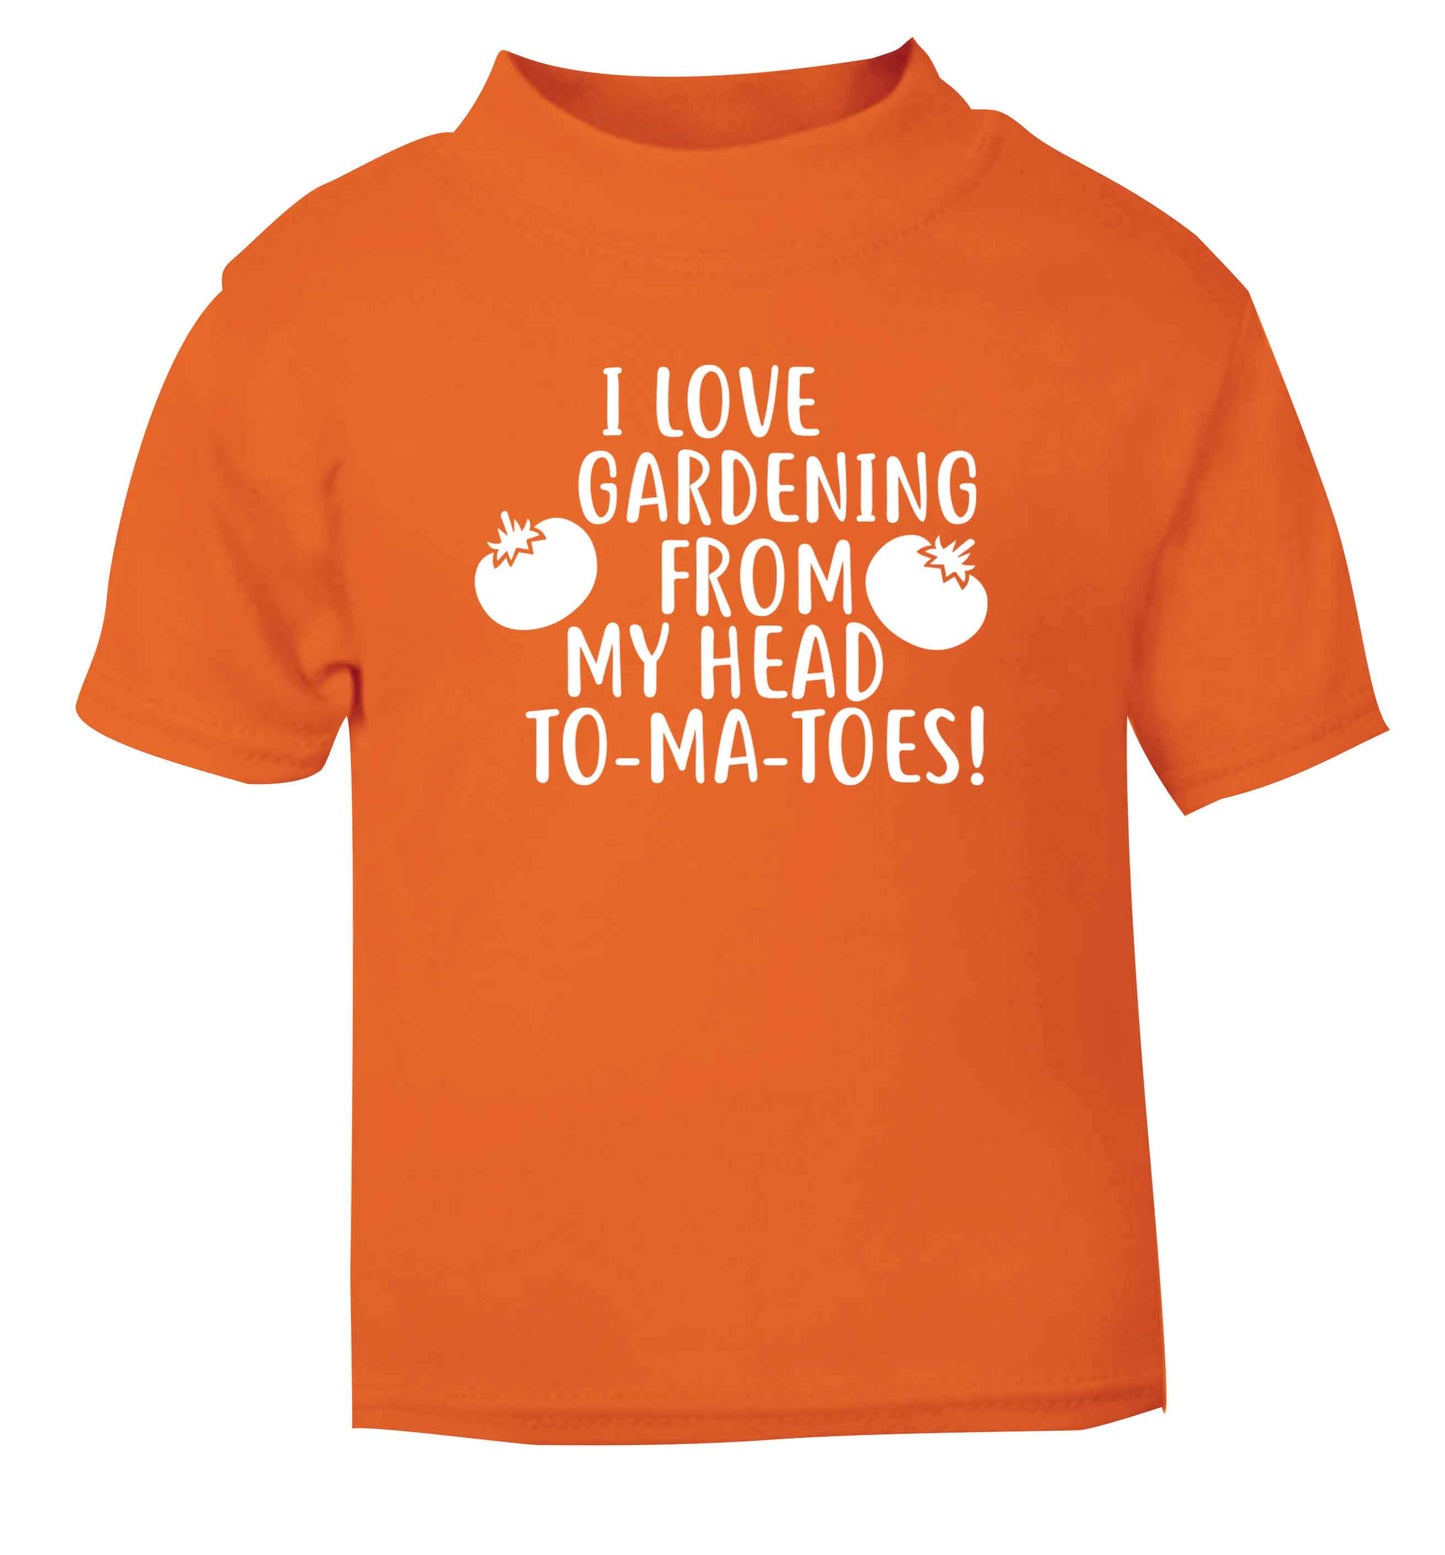 I love gardening from my head to-ma-toes orange Baby Toddler Tshirt 2 Years